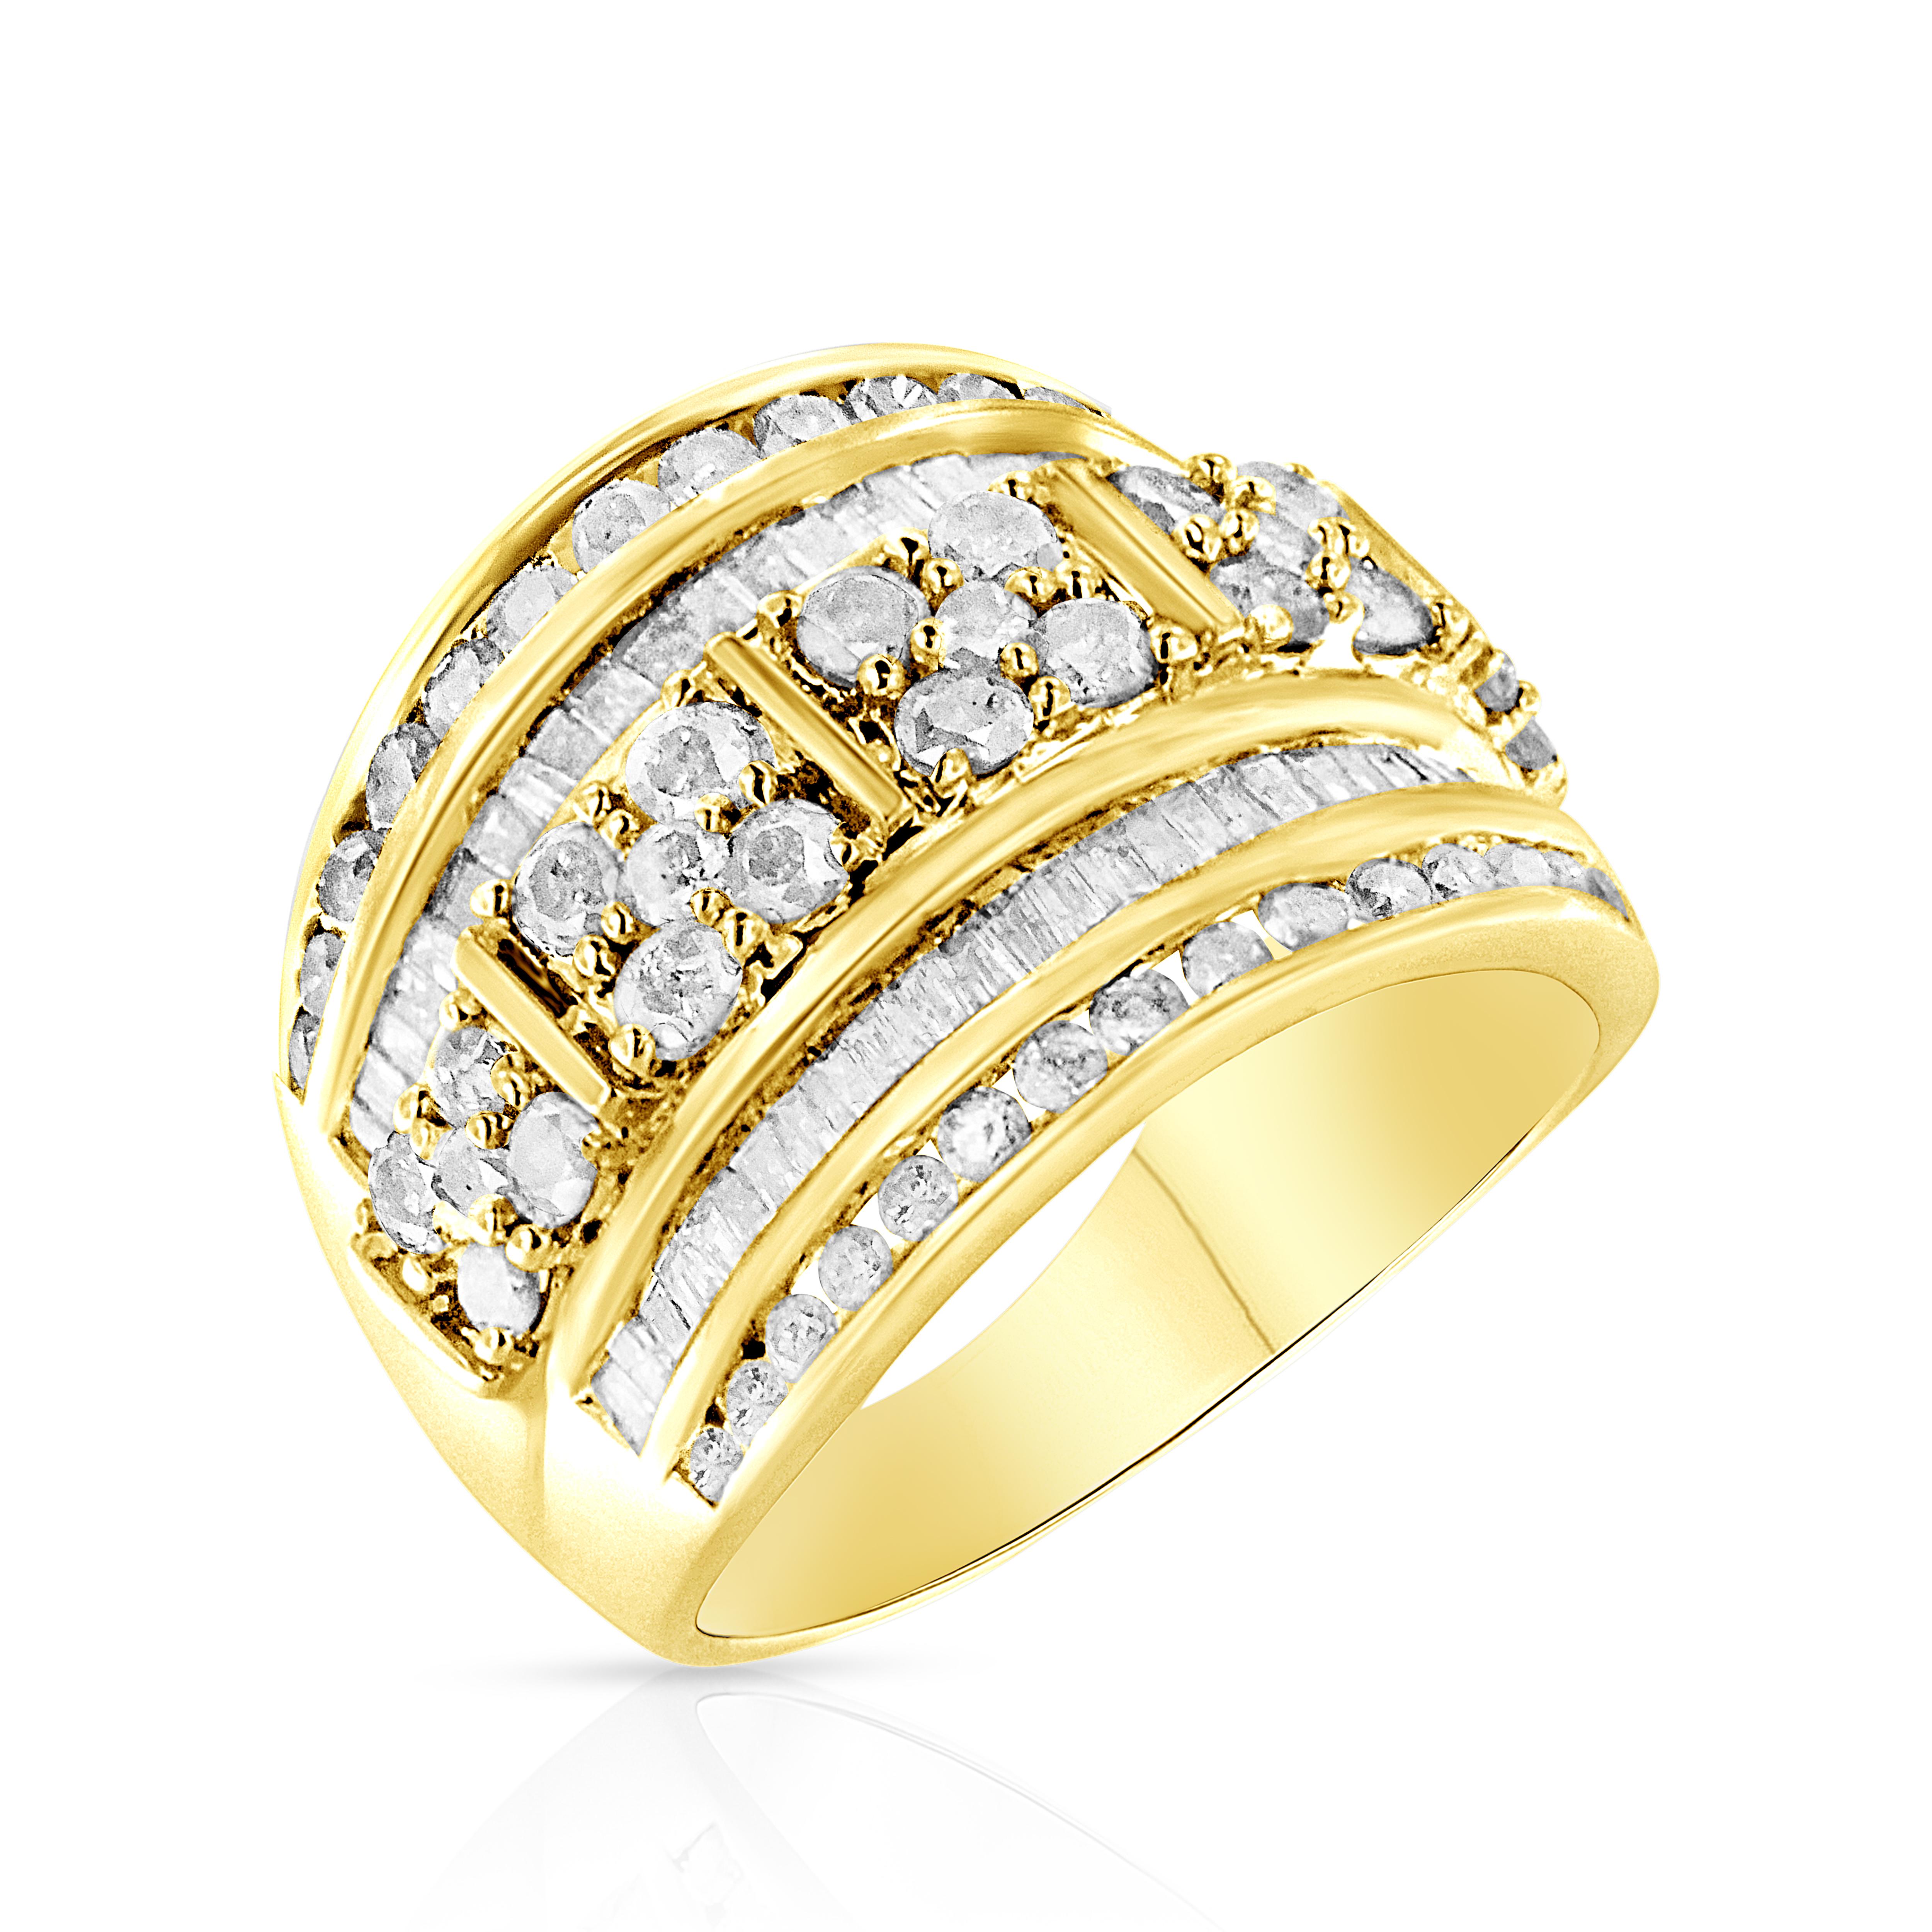 For Sale:  10k Yellow Gold over Sterling Silver 2.0 Carat Diamond Cocktail Fashion Ring 2